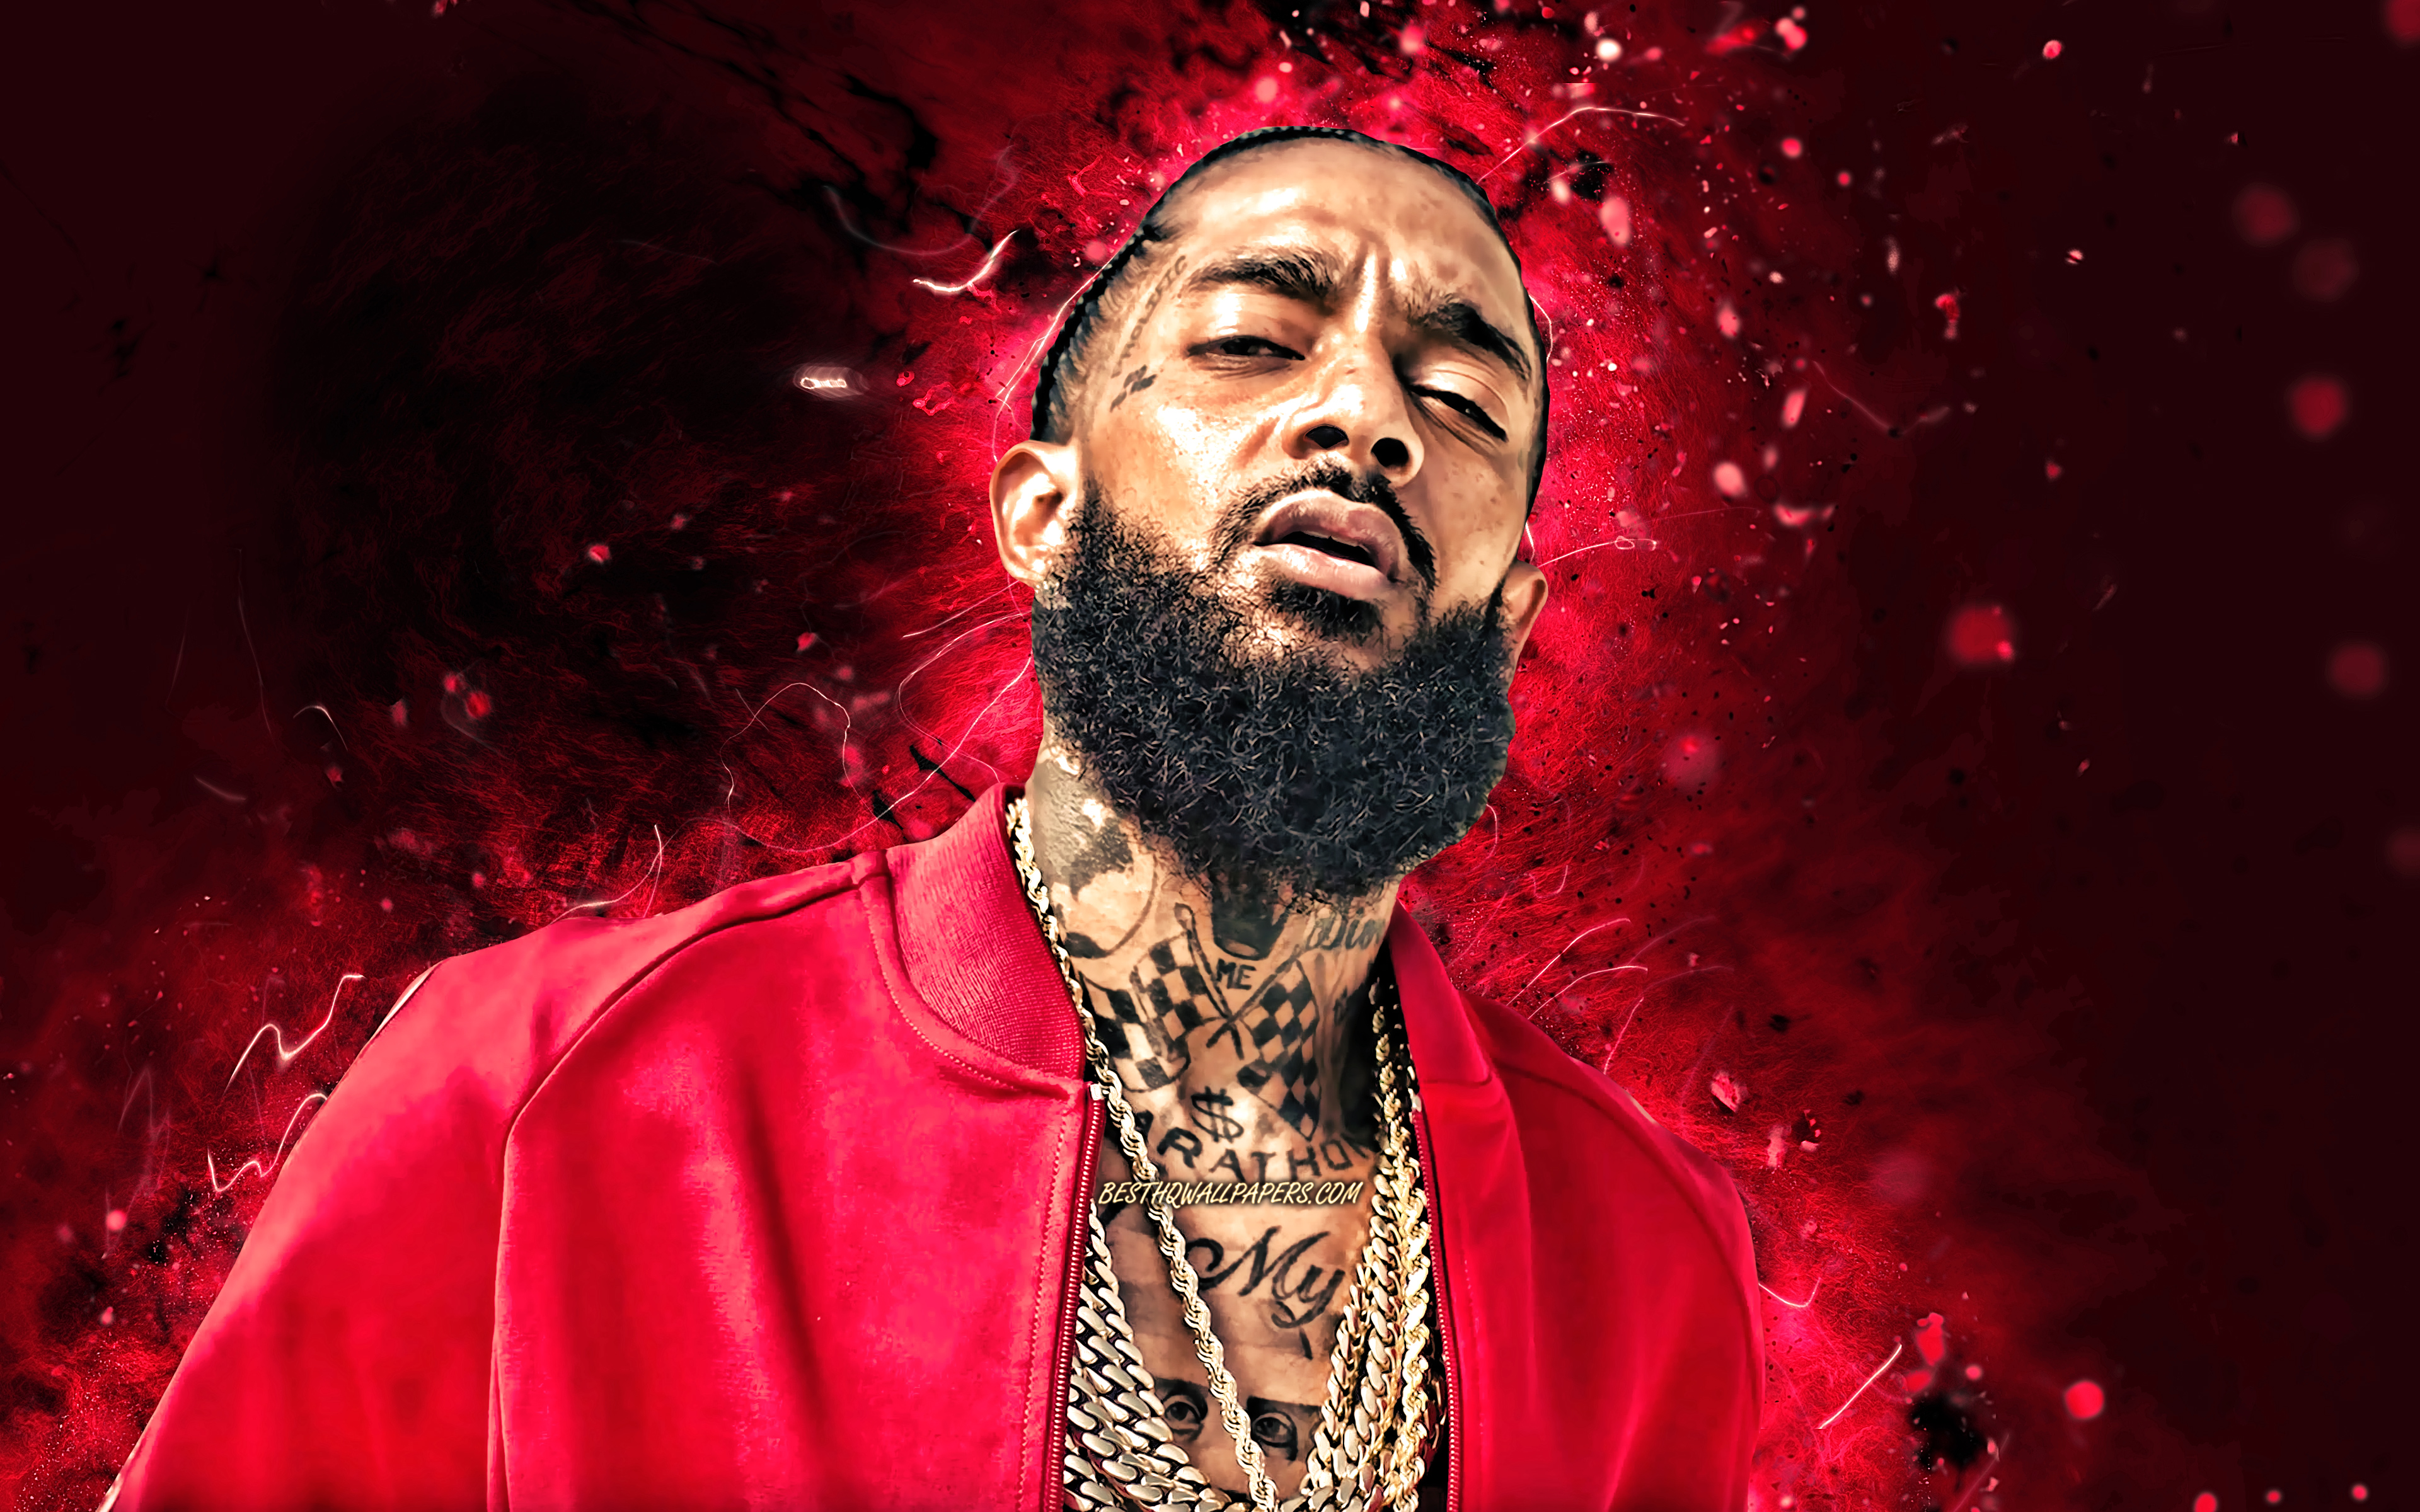 Download wallpaper Nipsey Hussle, american rapper, red neon lights, 4K, music stars, creative, Ermias Joseph Asghedom, american celebrity, Nipsey Hussle 4K for desktop with resolution 3840x2400. High Quality HD picture wallpaper